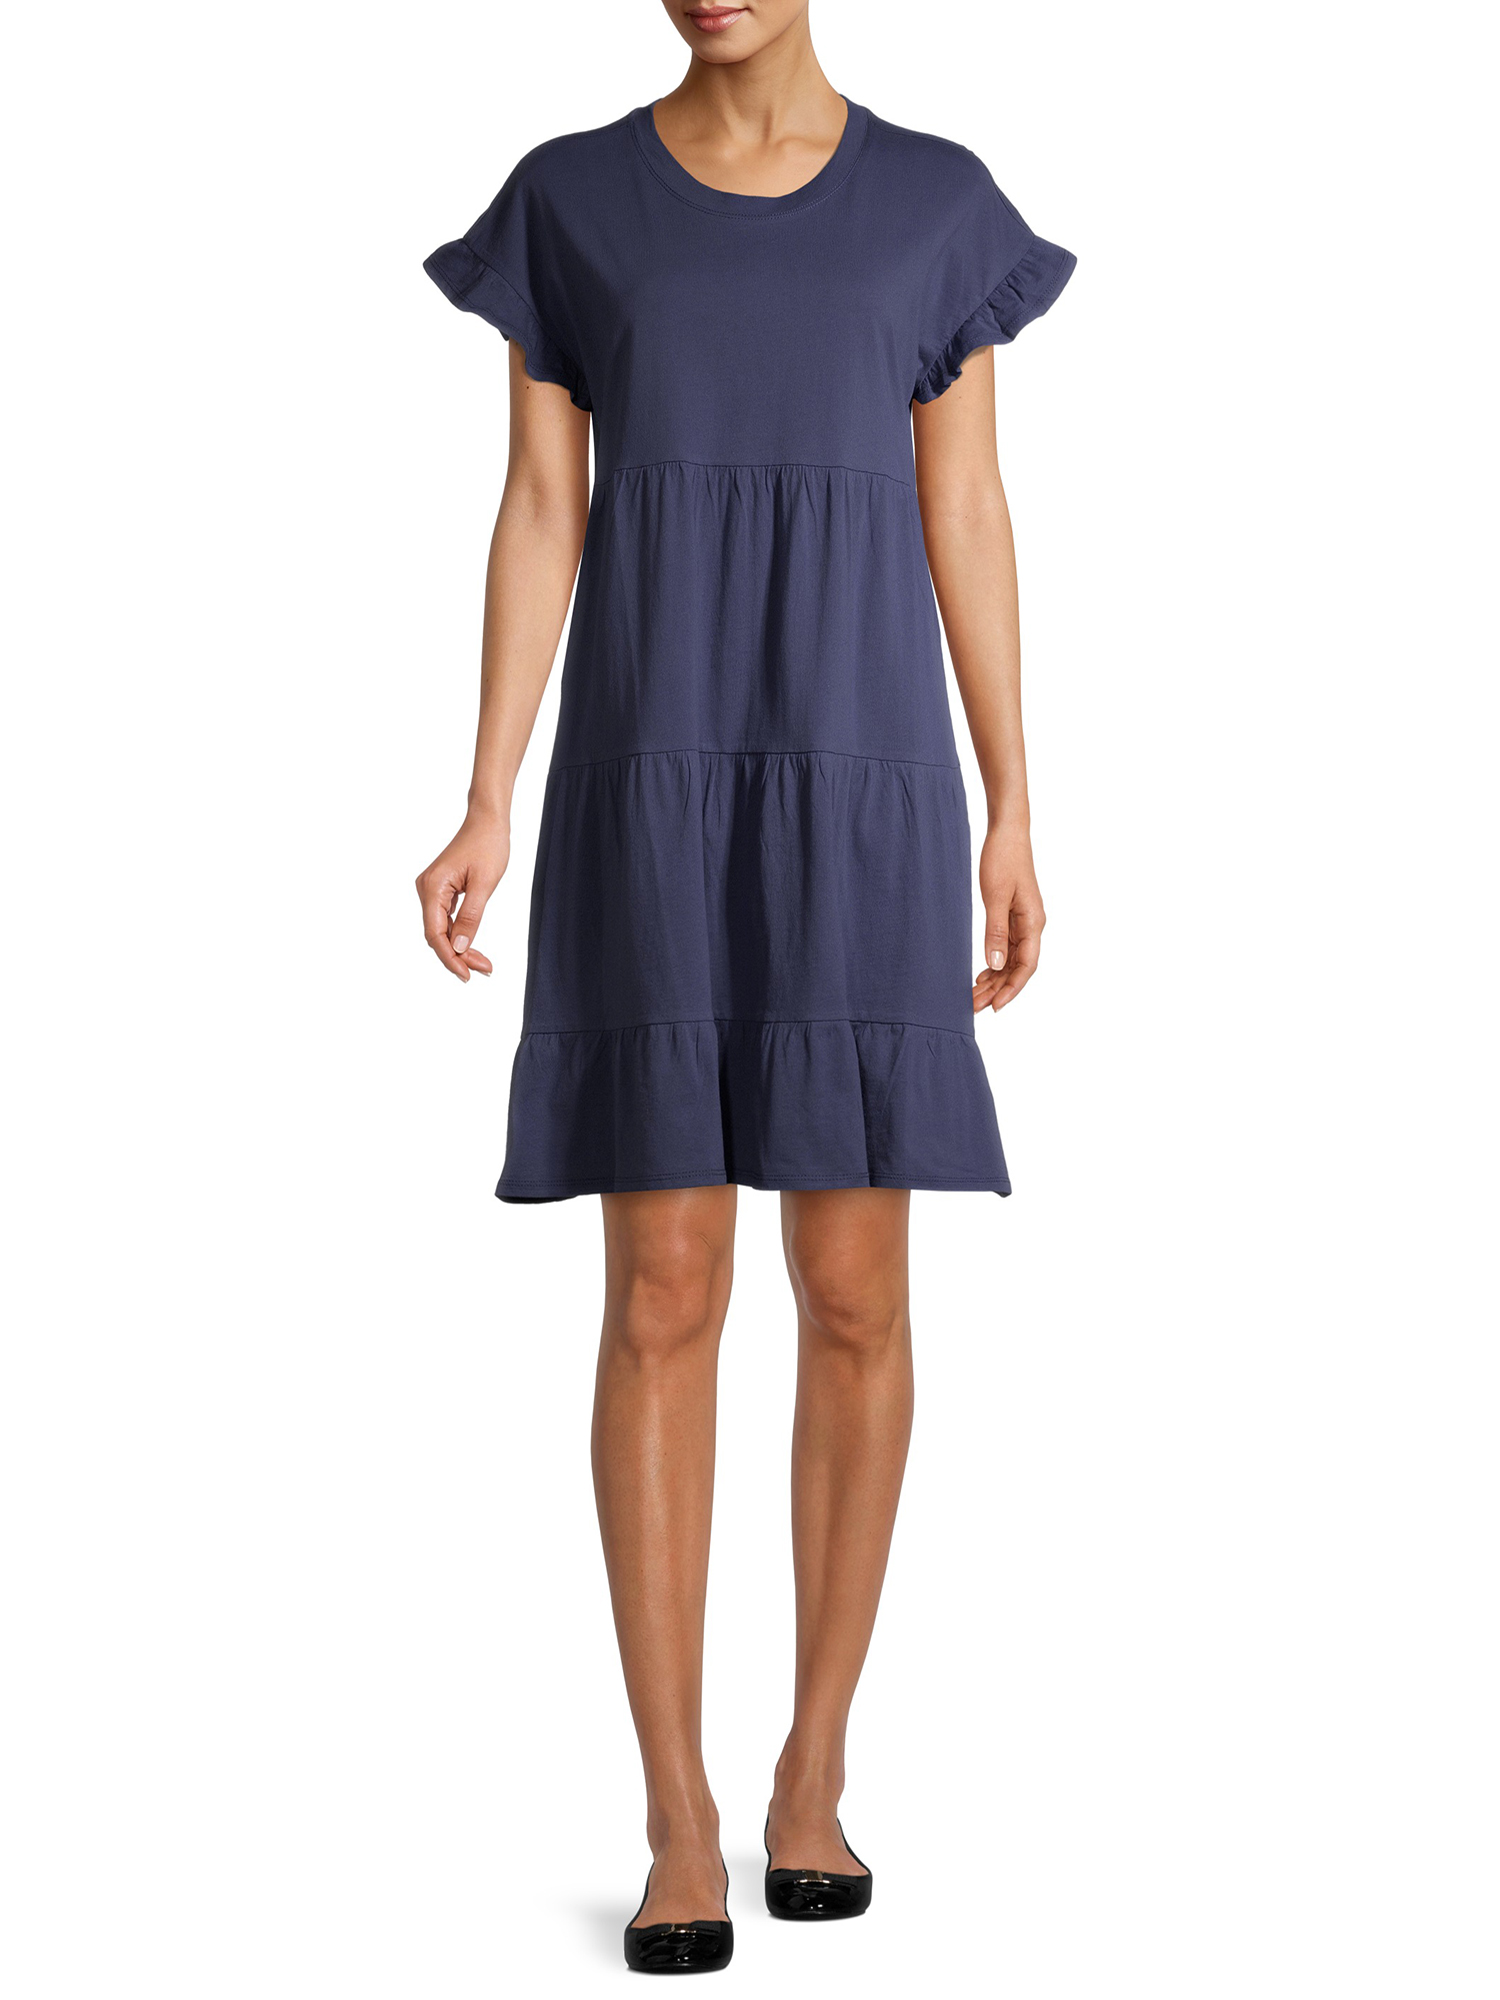 Time and Tru Women's Tiered Knit Dress - image 4 of 7